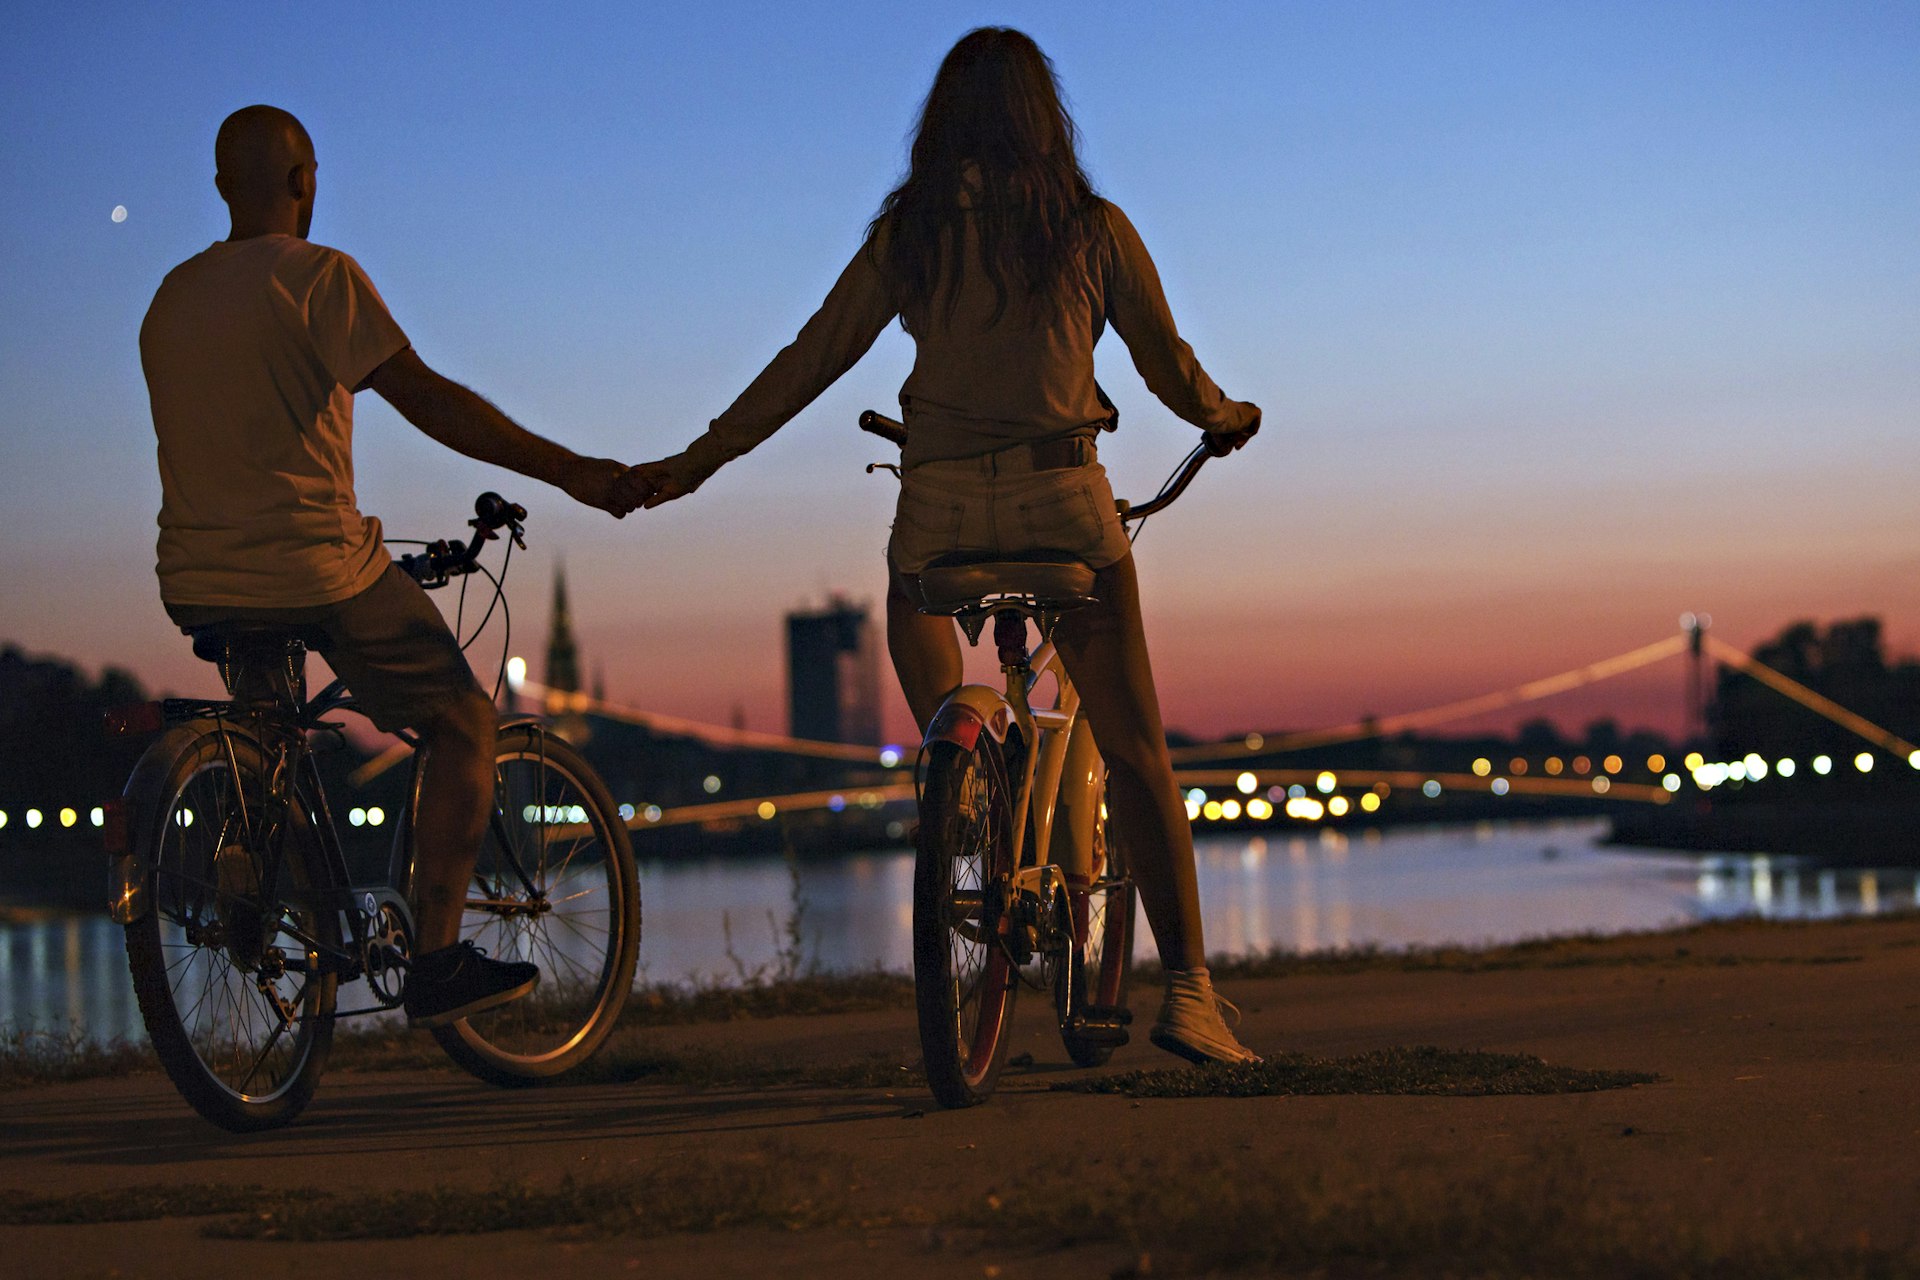 A young couple on bicycles, a boy and a girl, hold hands whilst looking across a bridge at night in Osijek, Croatia